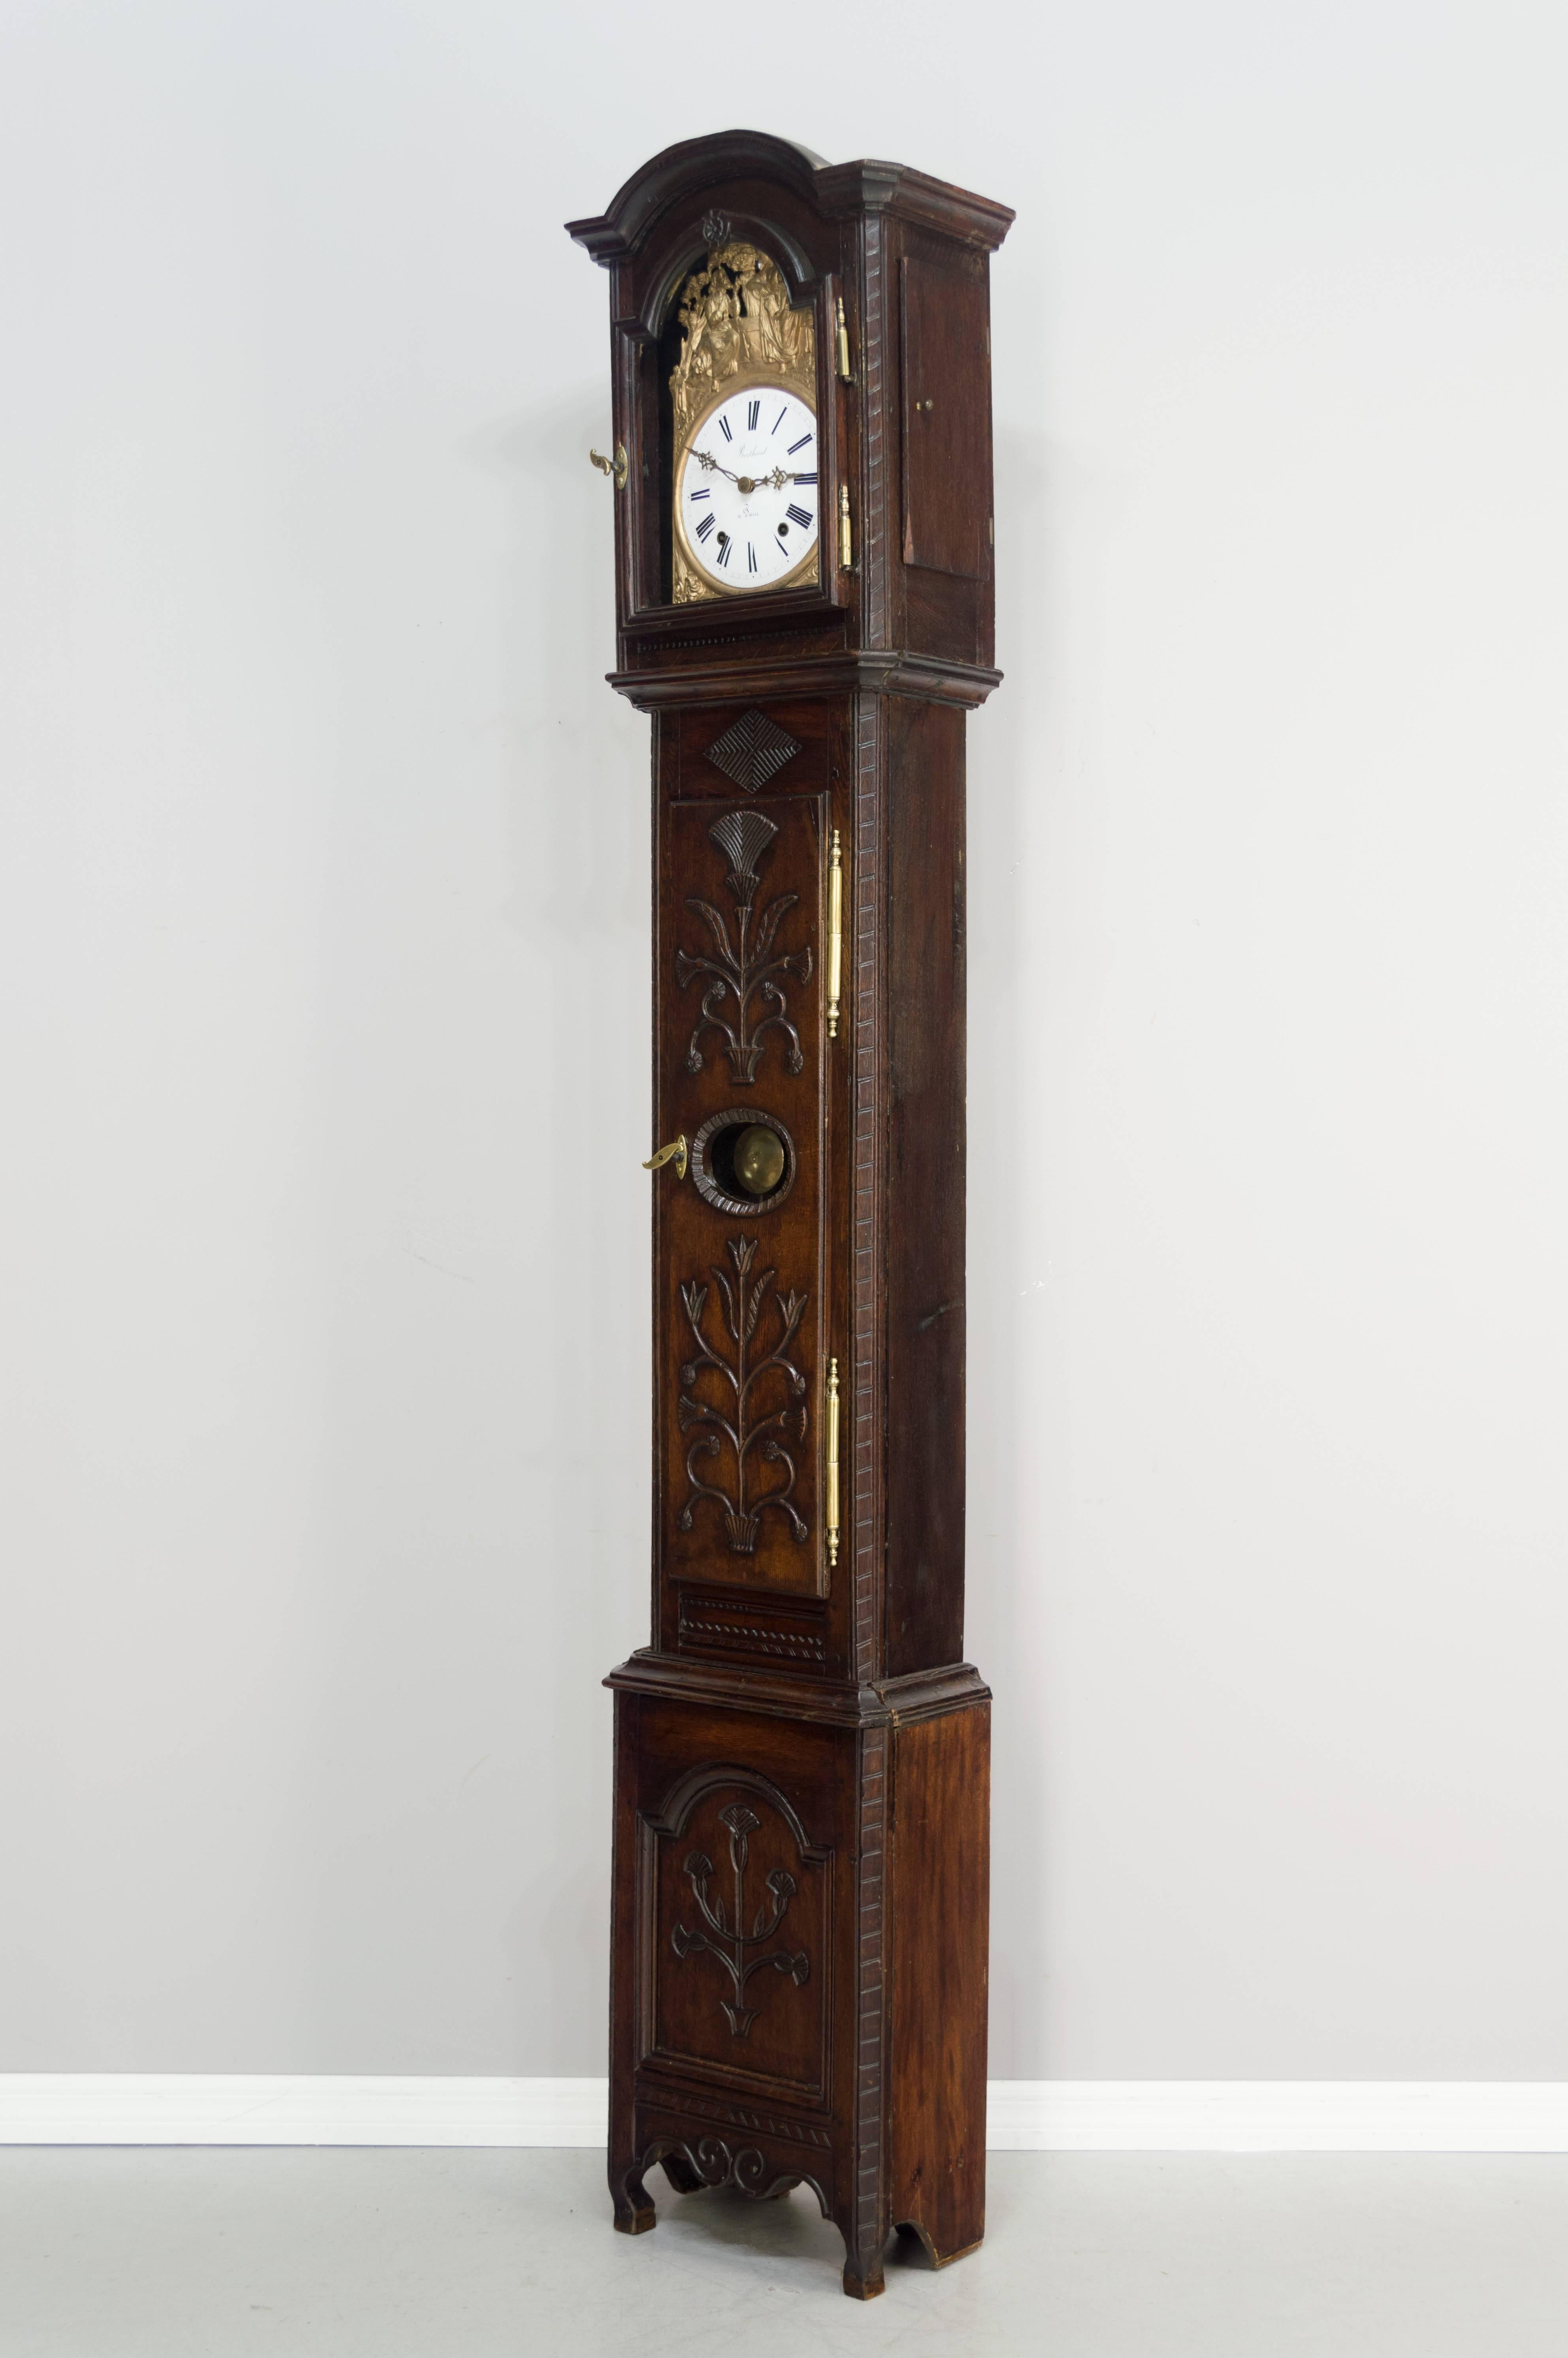 A good 18th century tall case clock with a later Morbier movement in working condition. The case is made of oak with floral carvings and original brass hardware and with a waxed patina. The glass panes are old. Late 19th c. seven day Morbier